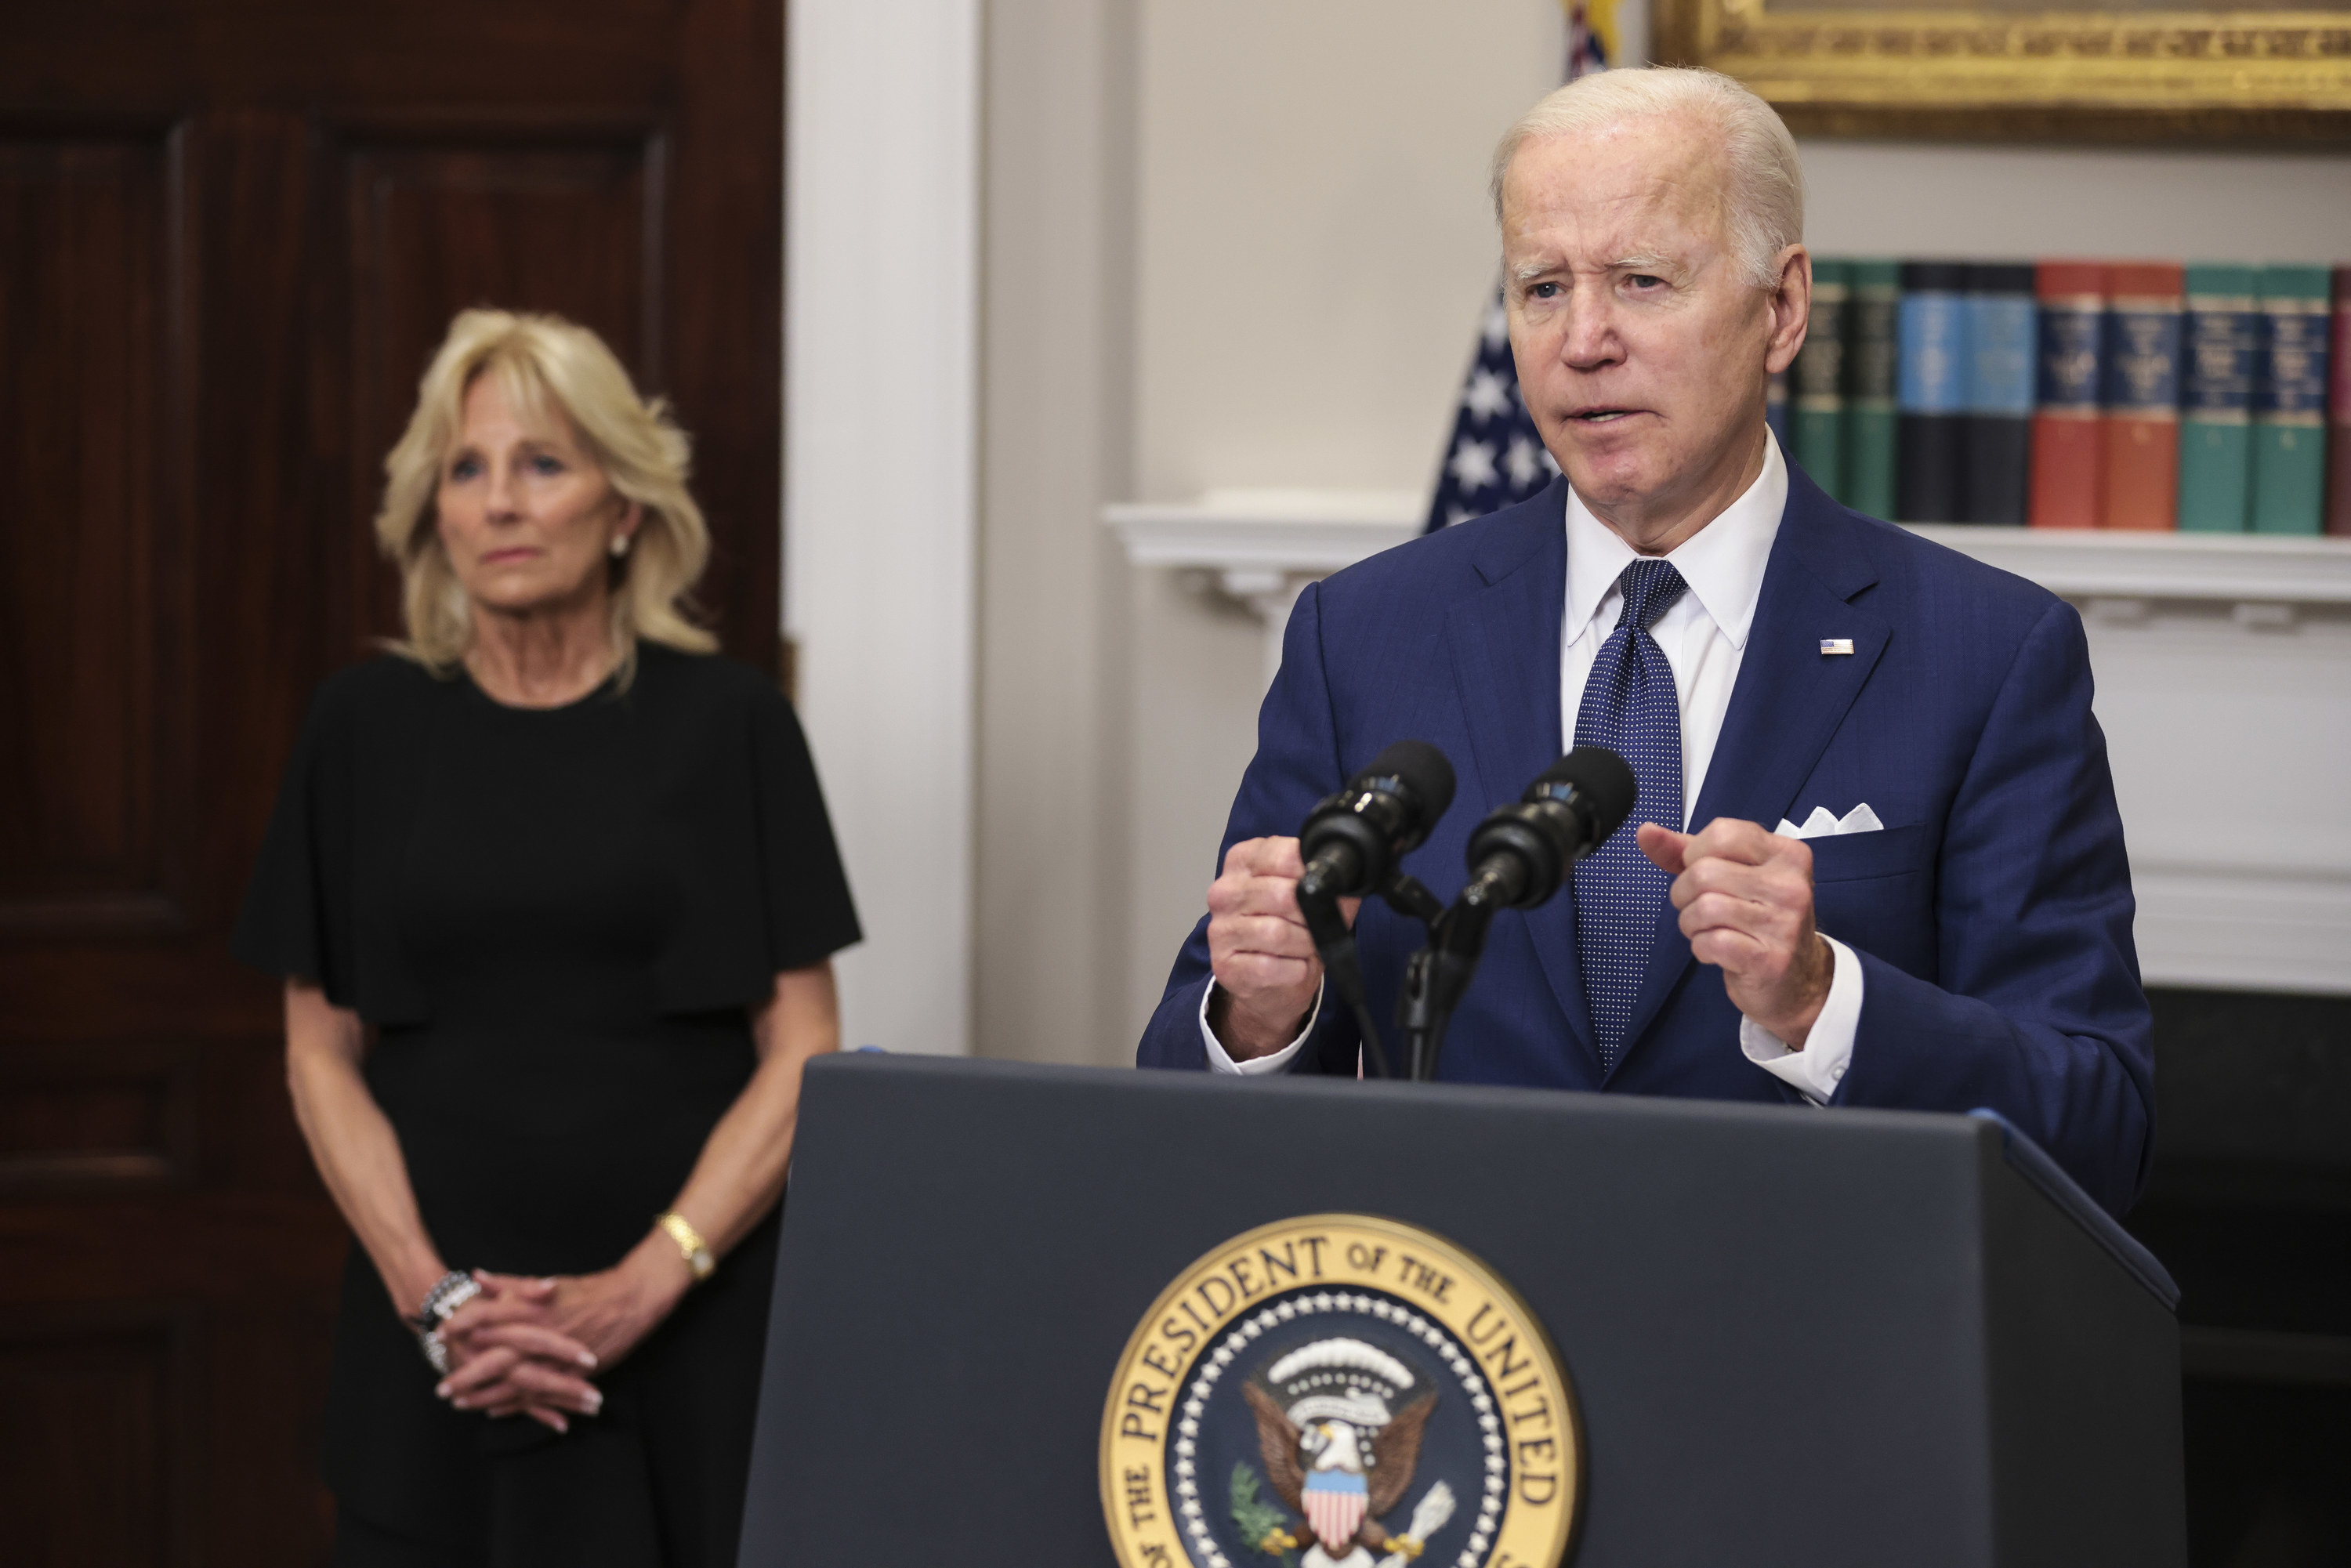 President Joe Biden joined by First Lady Jill Biden, speaks to the nation about the mass shooting at Robb Elementary School in Uvalde, Texas, from the White House on May 24, 2022 in Washington, DC.